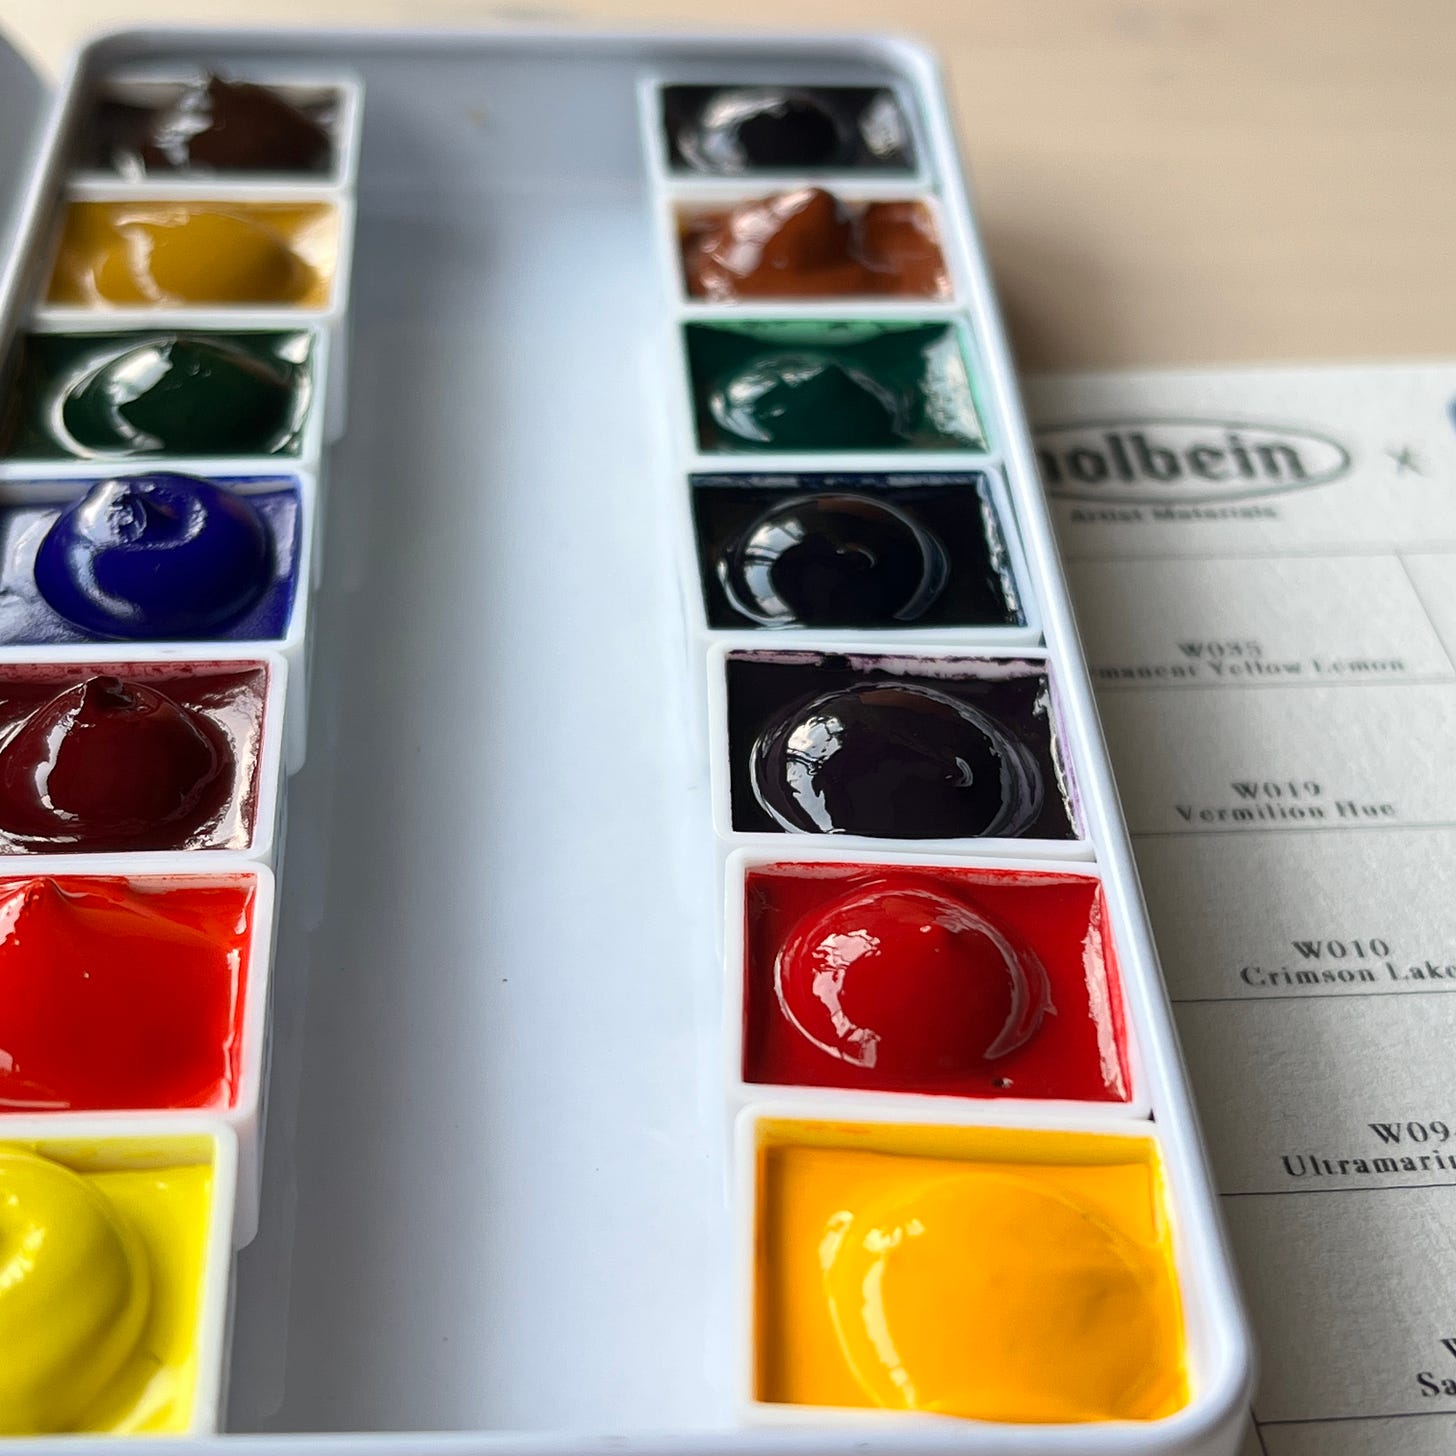 image: a set of 14 half-pan watercolour paint set in an enamel travel-sized case from Holbein, a reputable watercolour manufacturer.